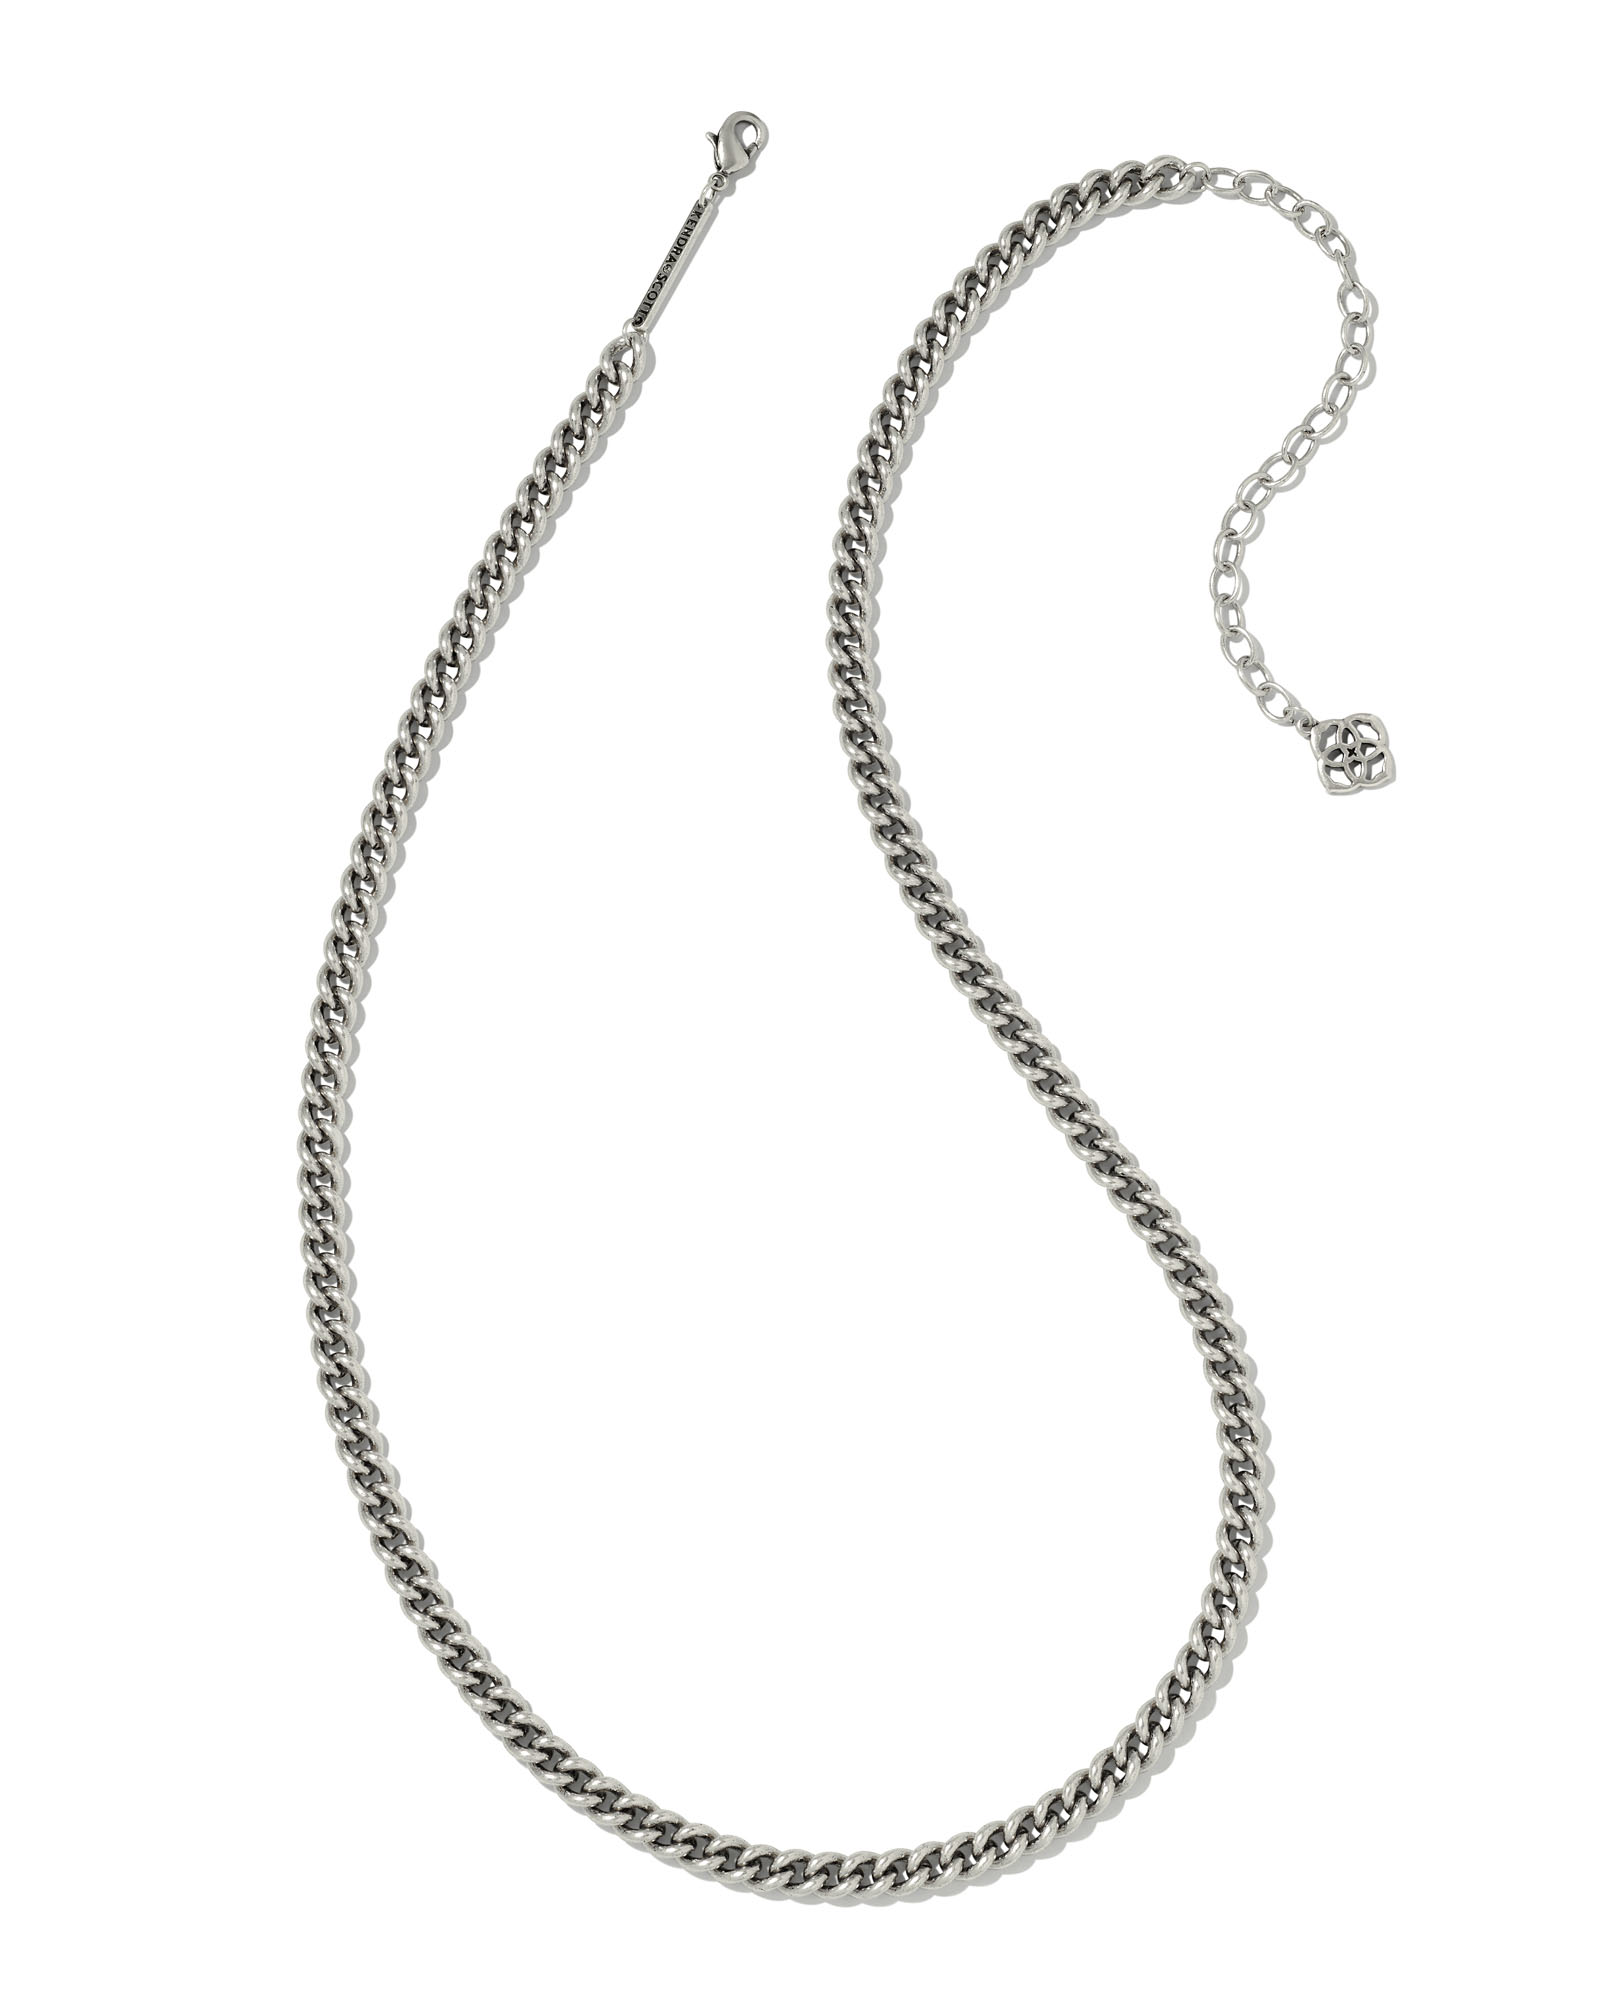 Ace Chain Necklace in Vintage Silver | Kendra Scott